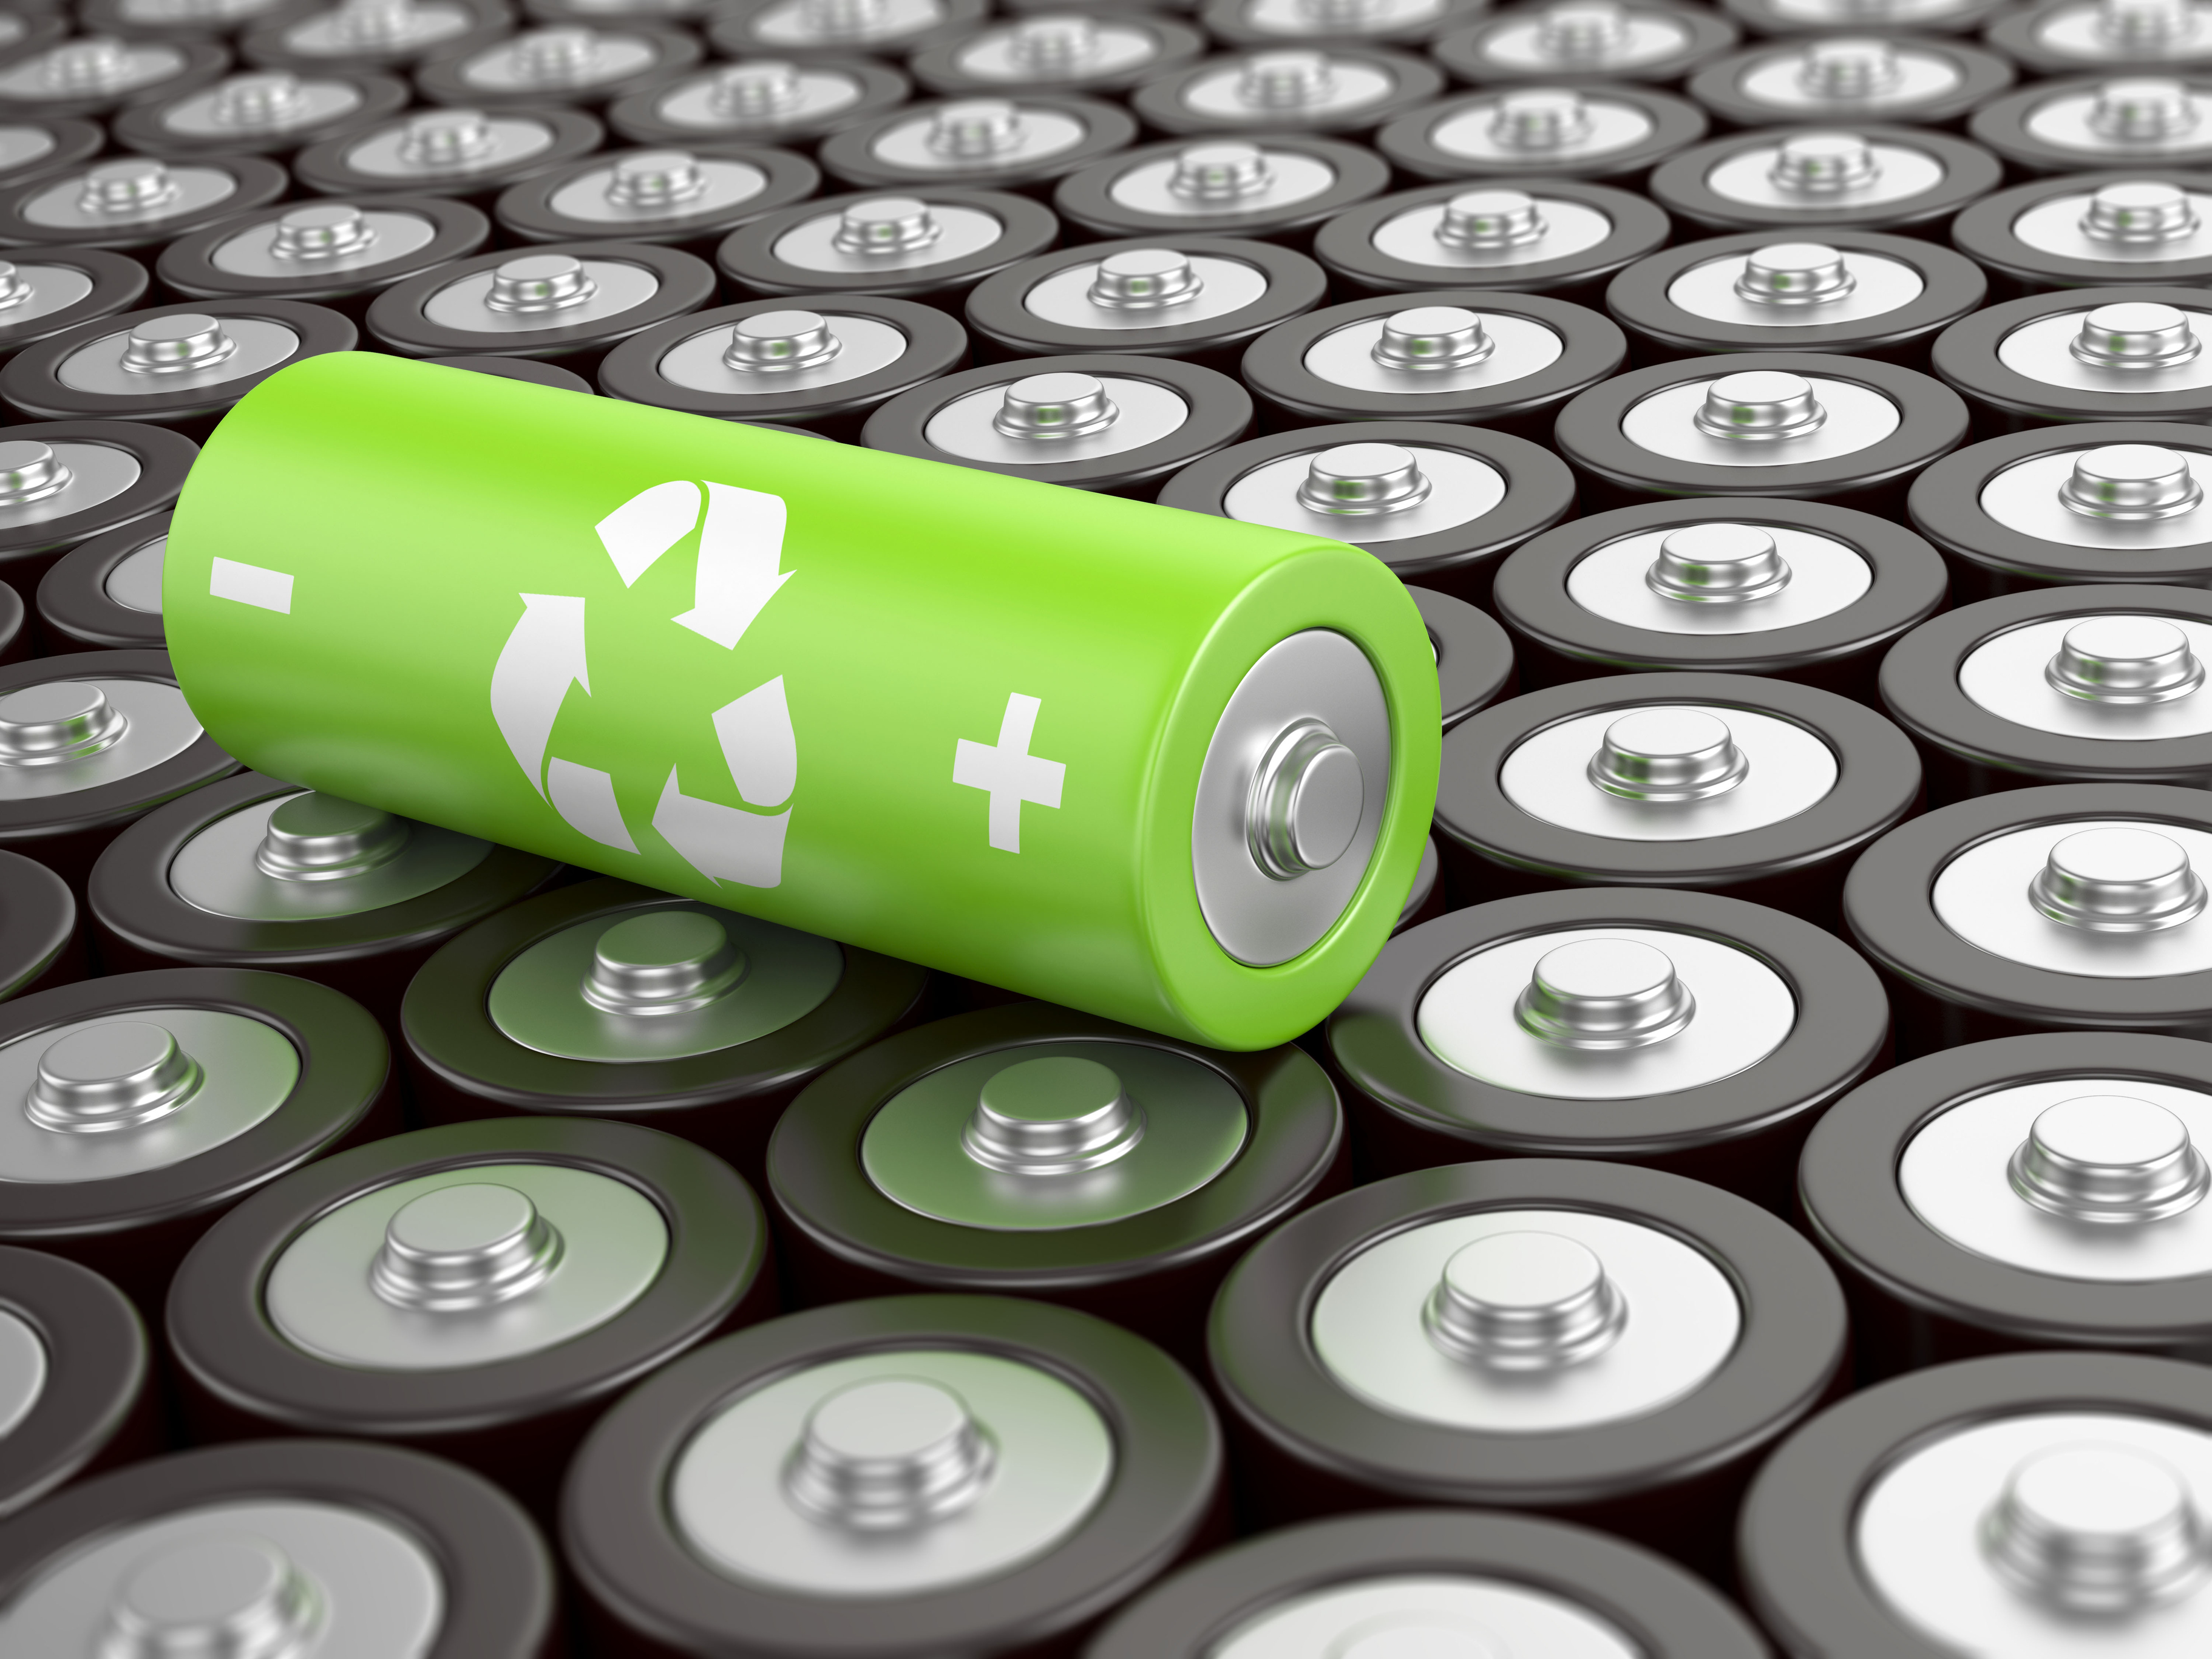 Recycling of end-of-life batteries will recover critical raw materials.